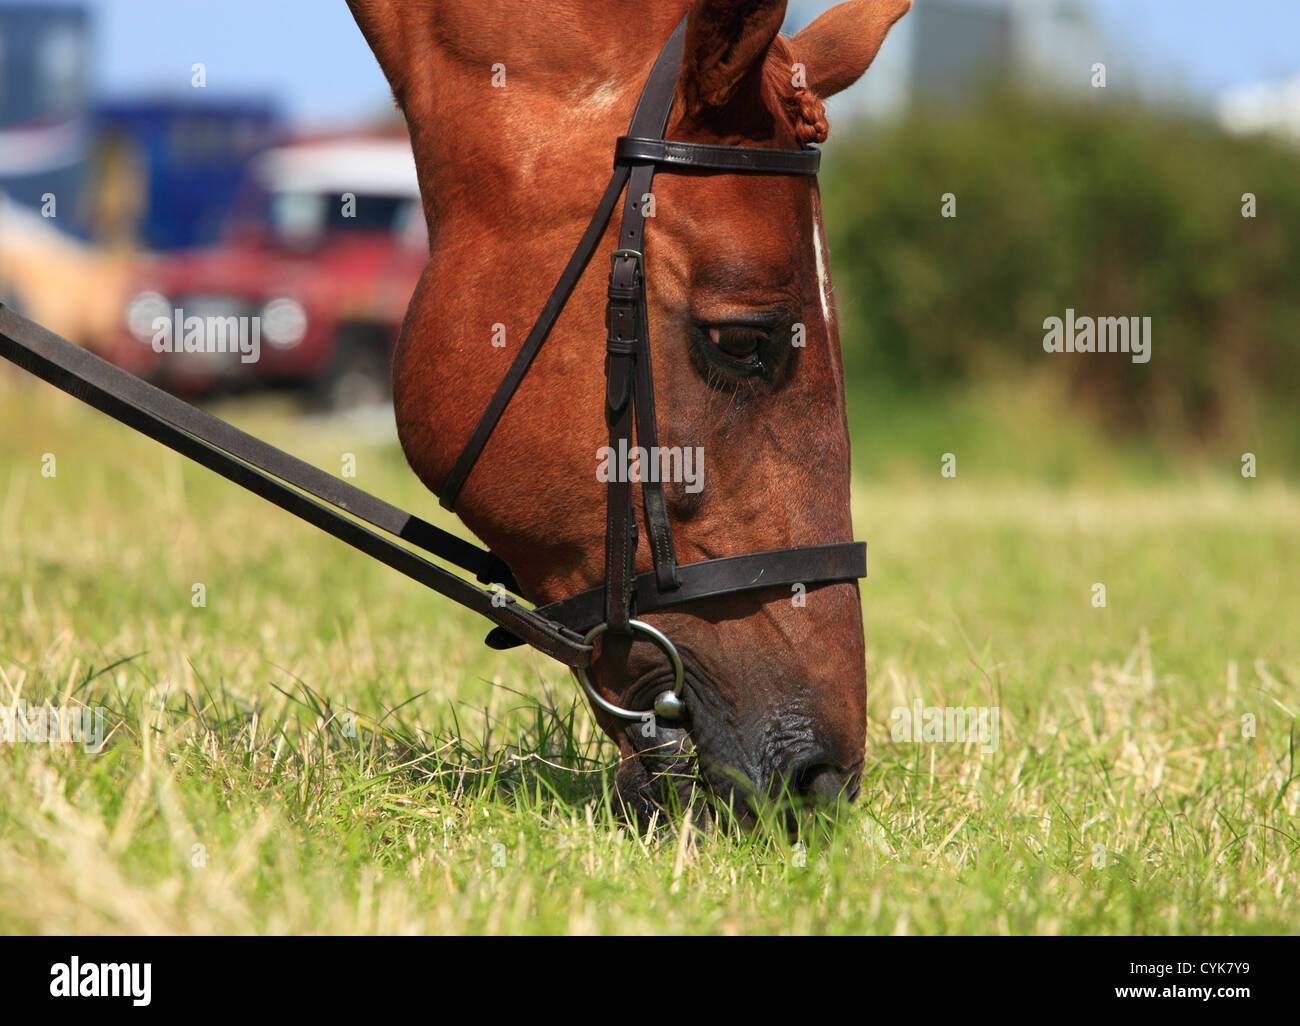 Brown horse with reins grazing on grass. Stock Photo